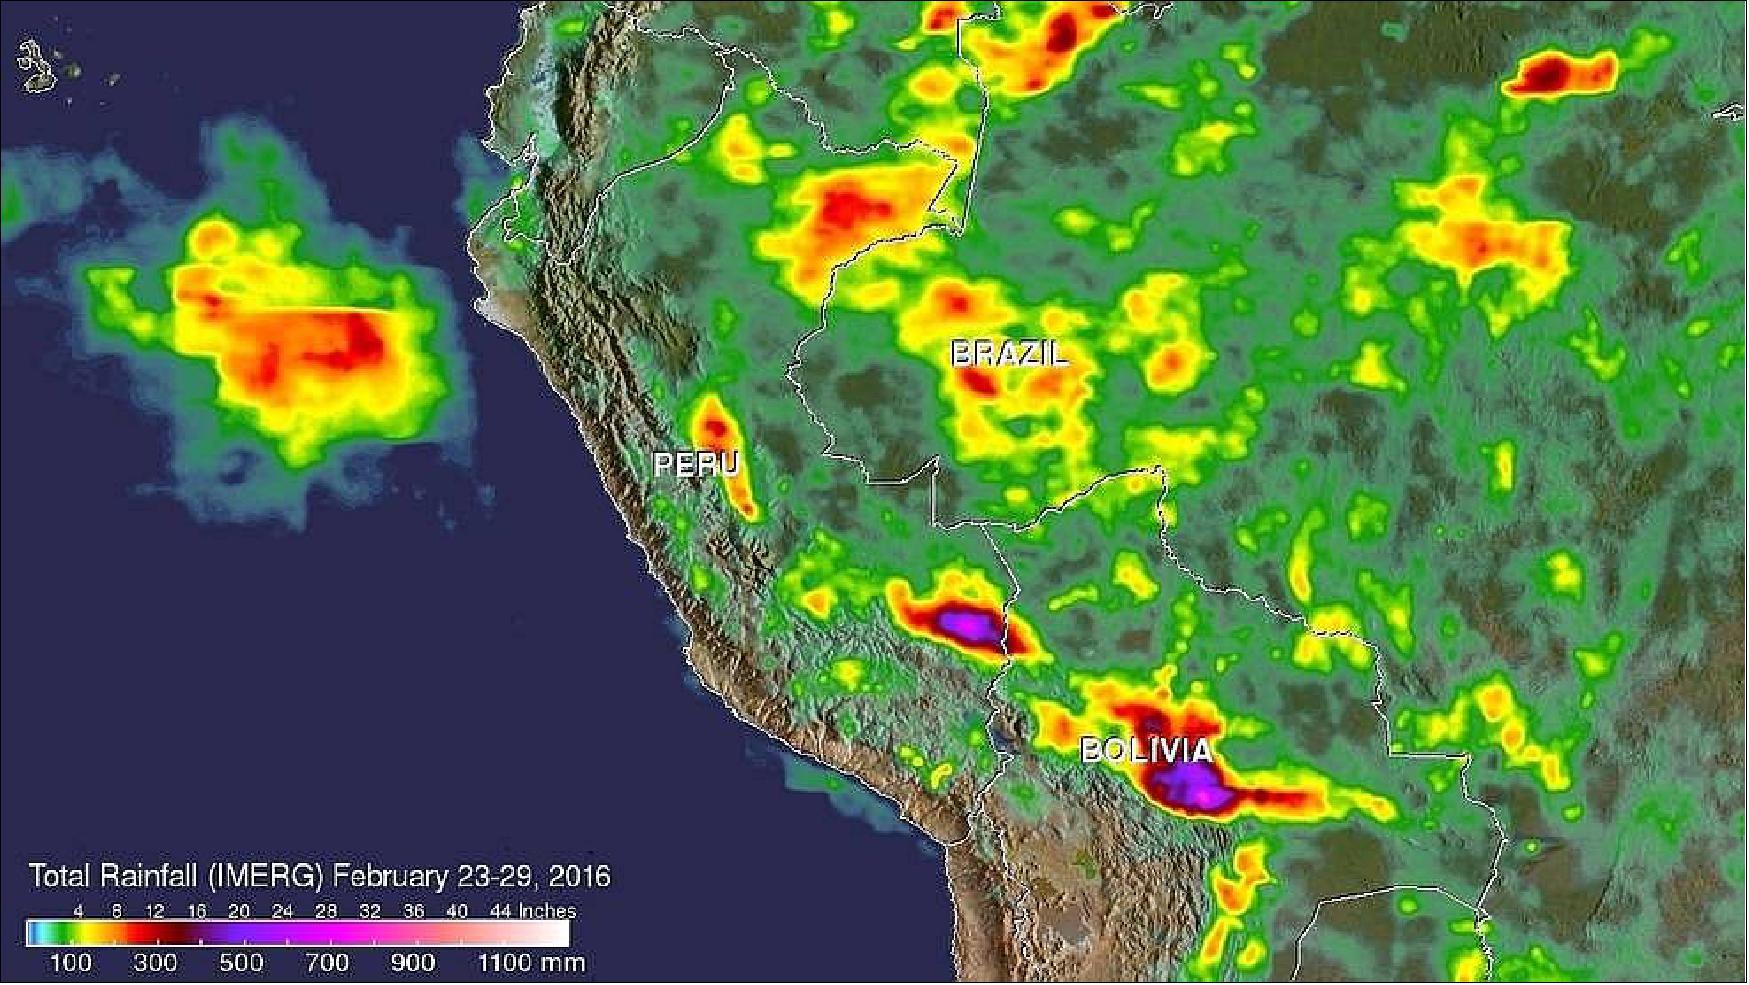 Figure 53: NASA's IMERG data collected from February 23-29, 2016 were used to estimate rainfall totals over this area of South America. The highest rainfall total estimates for this period were over 700 mm (27.6 inches). These extreme rainfall total estimates were shown east of the Andes in southeastern Peru and Bolivia (image credit: NASA, JAXA, SSAI, Hal Pierce)